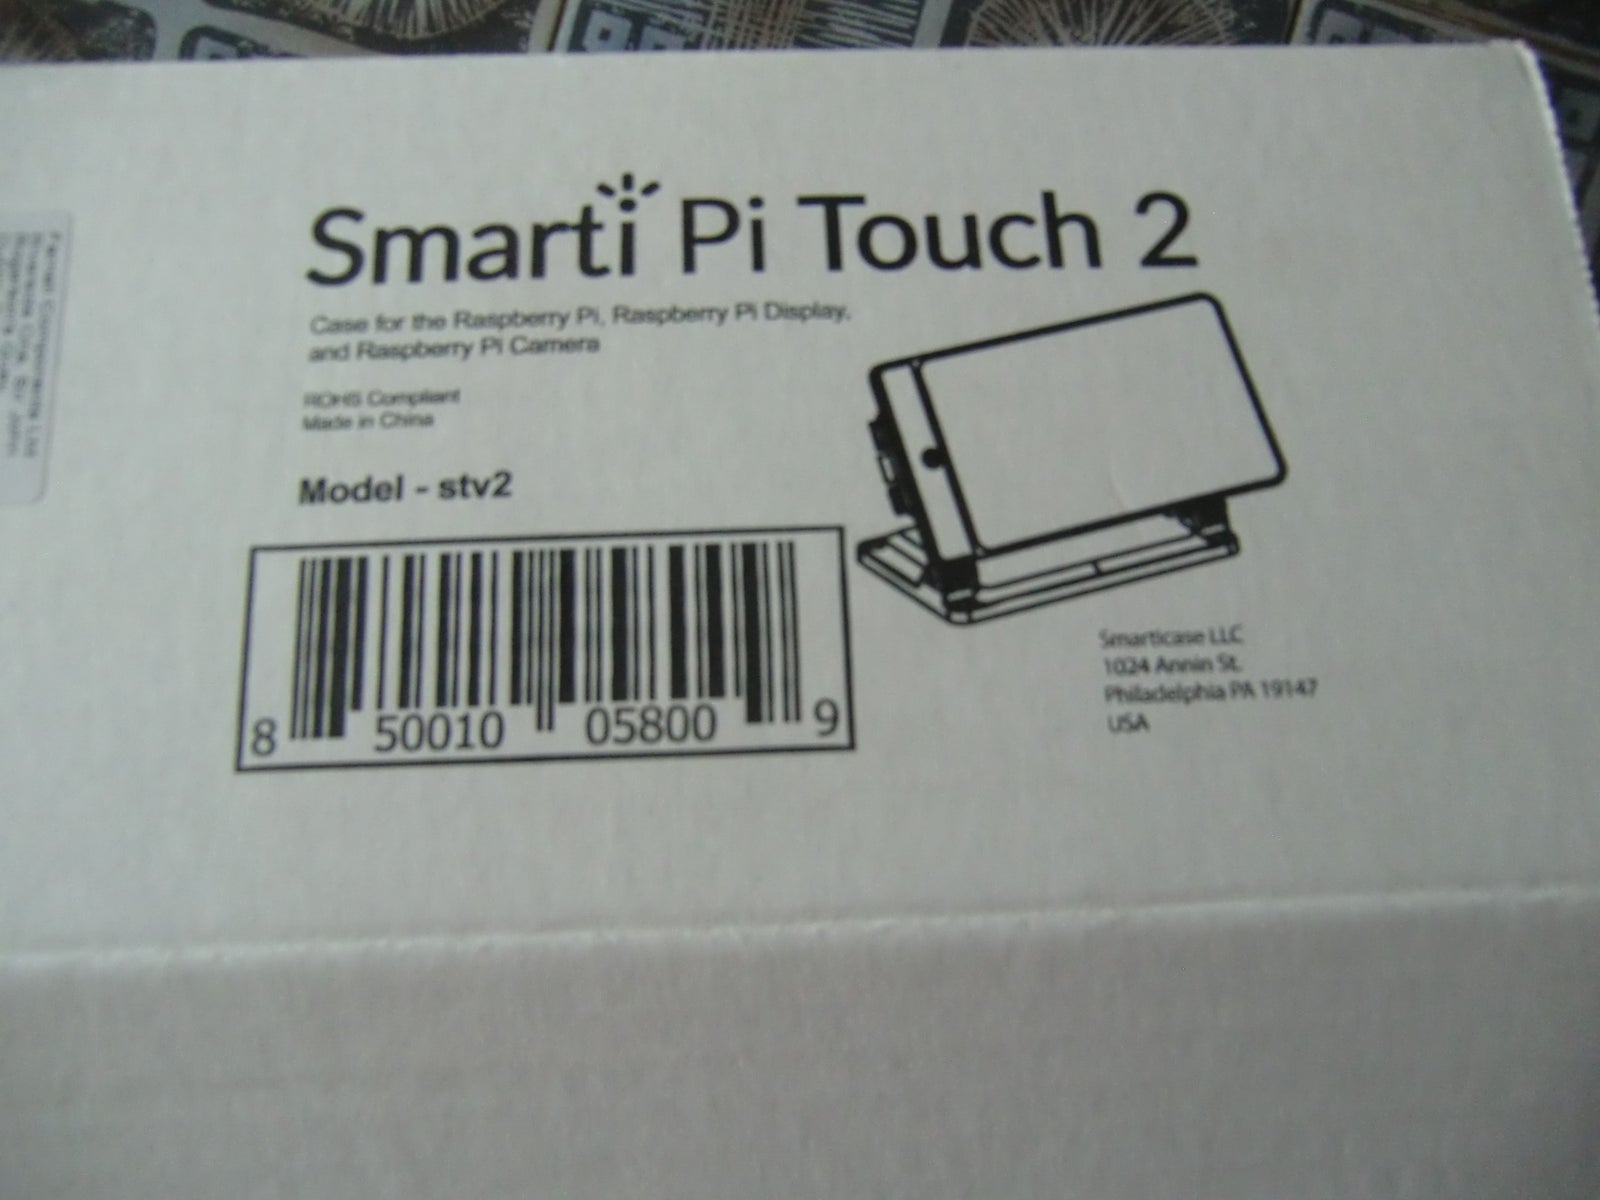 Smart pi touch 2